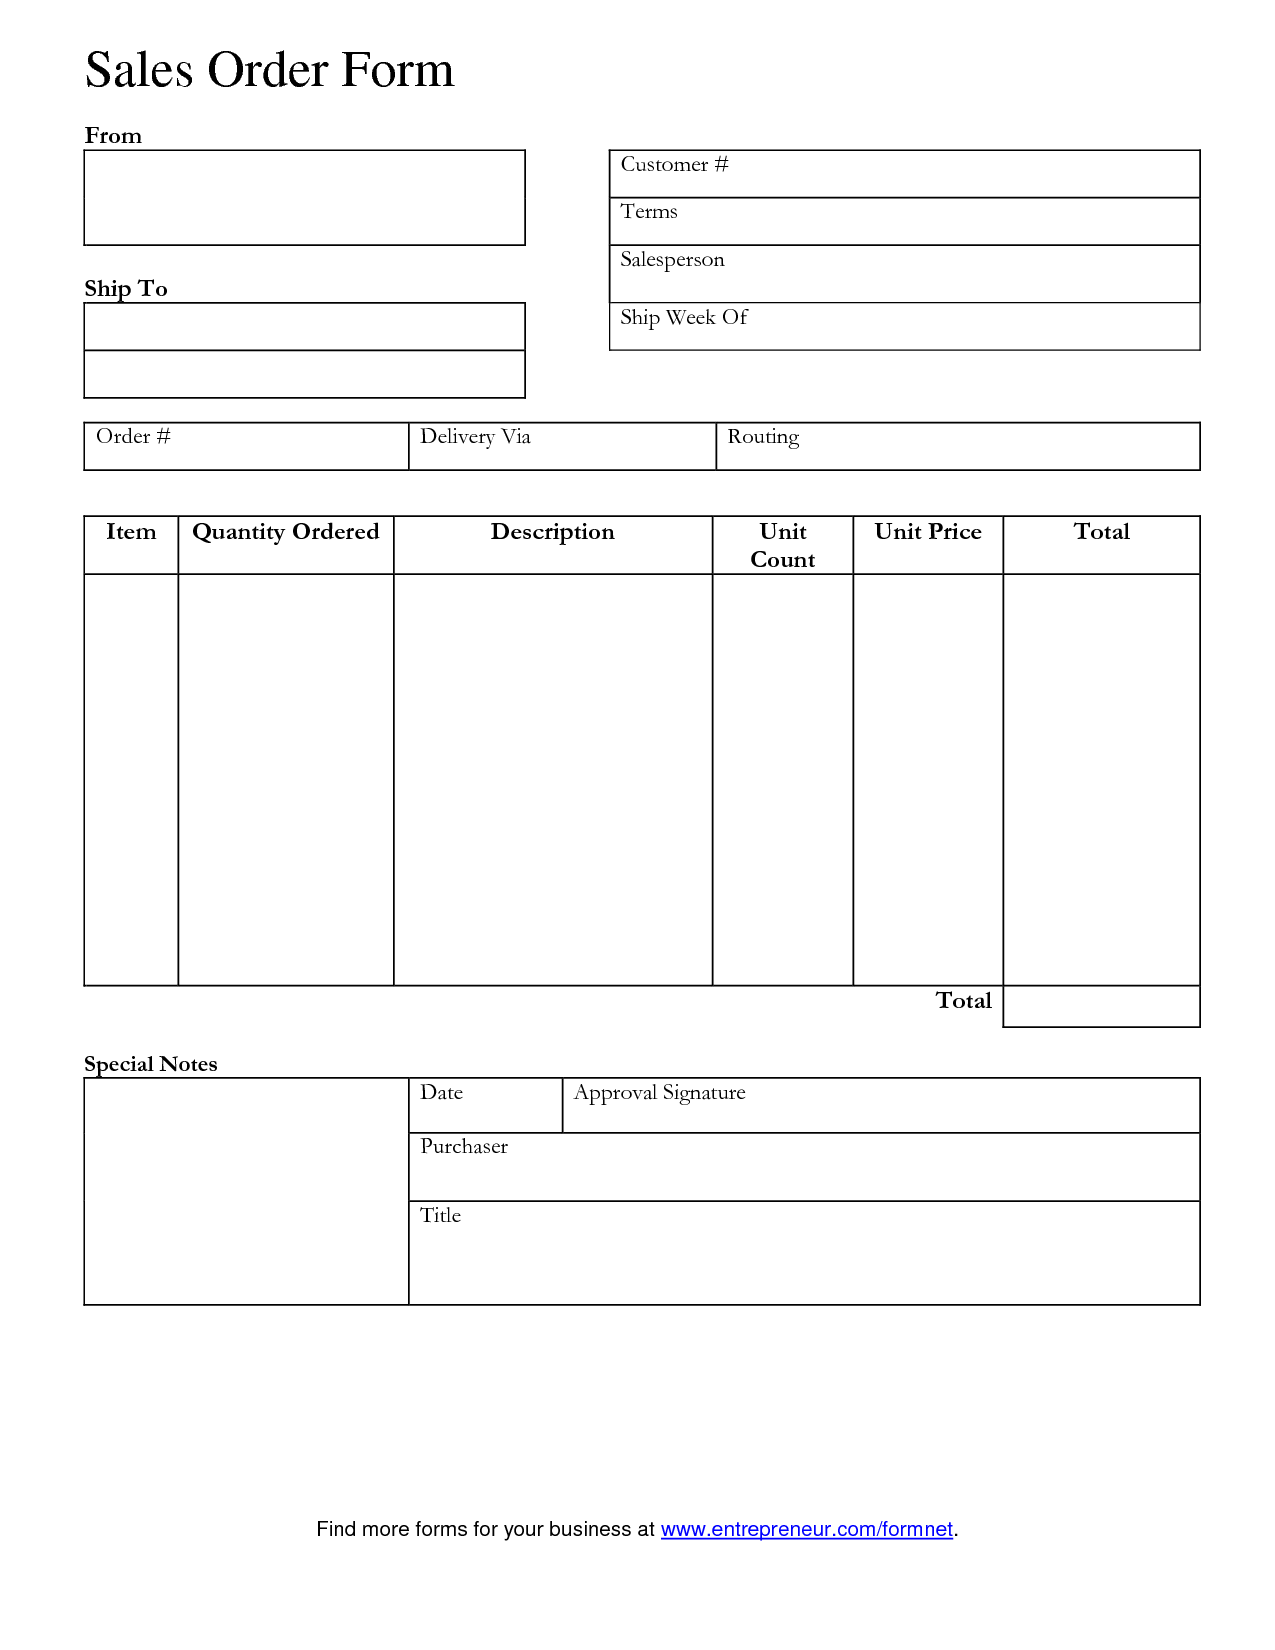 free printable sales order forms   Boat.jeremyeaton.co